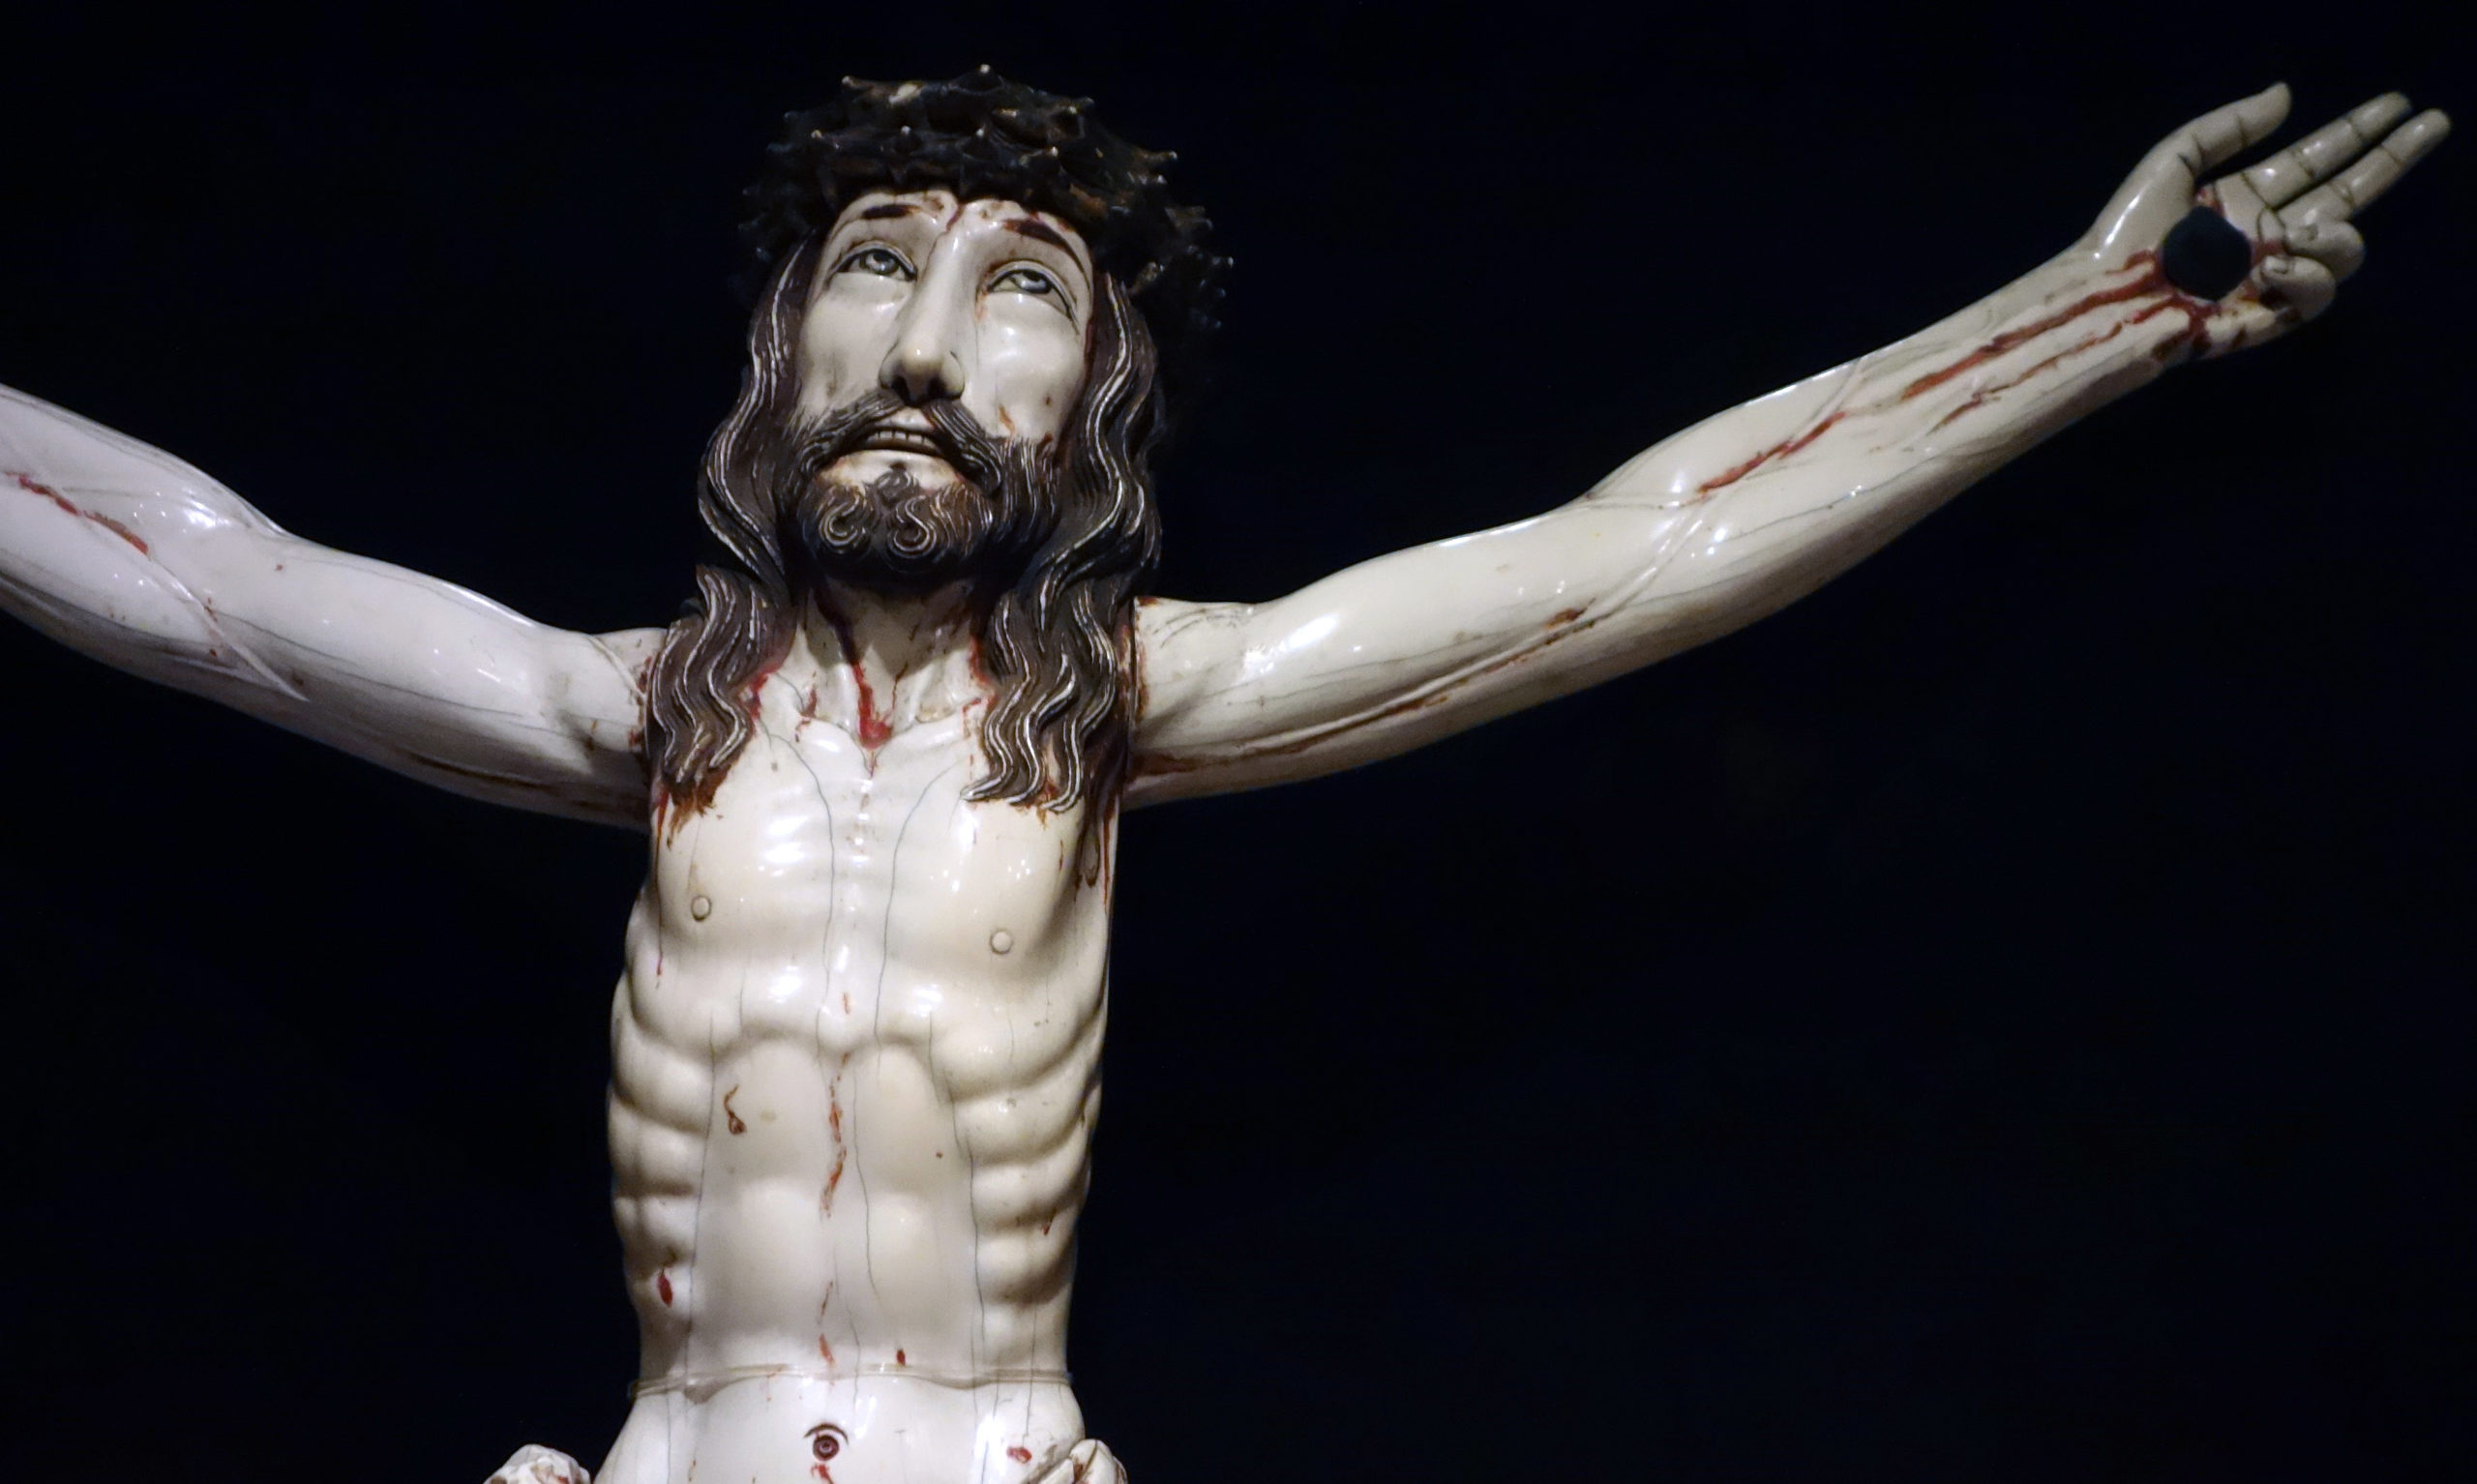 Christ Crucified, 17th century, ivory (Museo Franz Mayer, Mexico City)